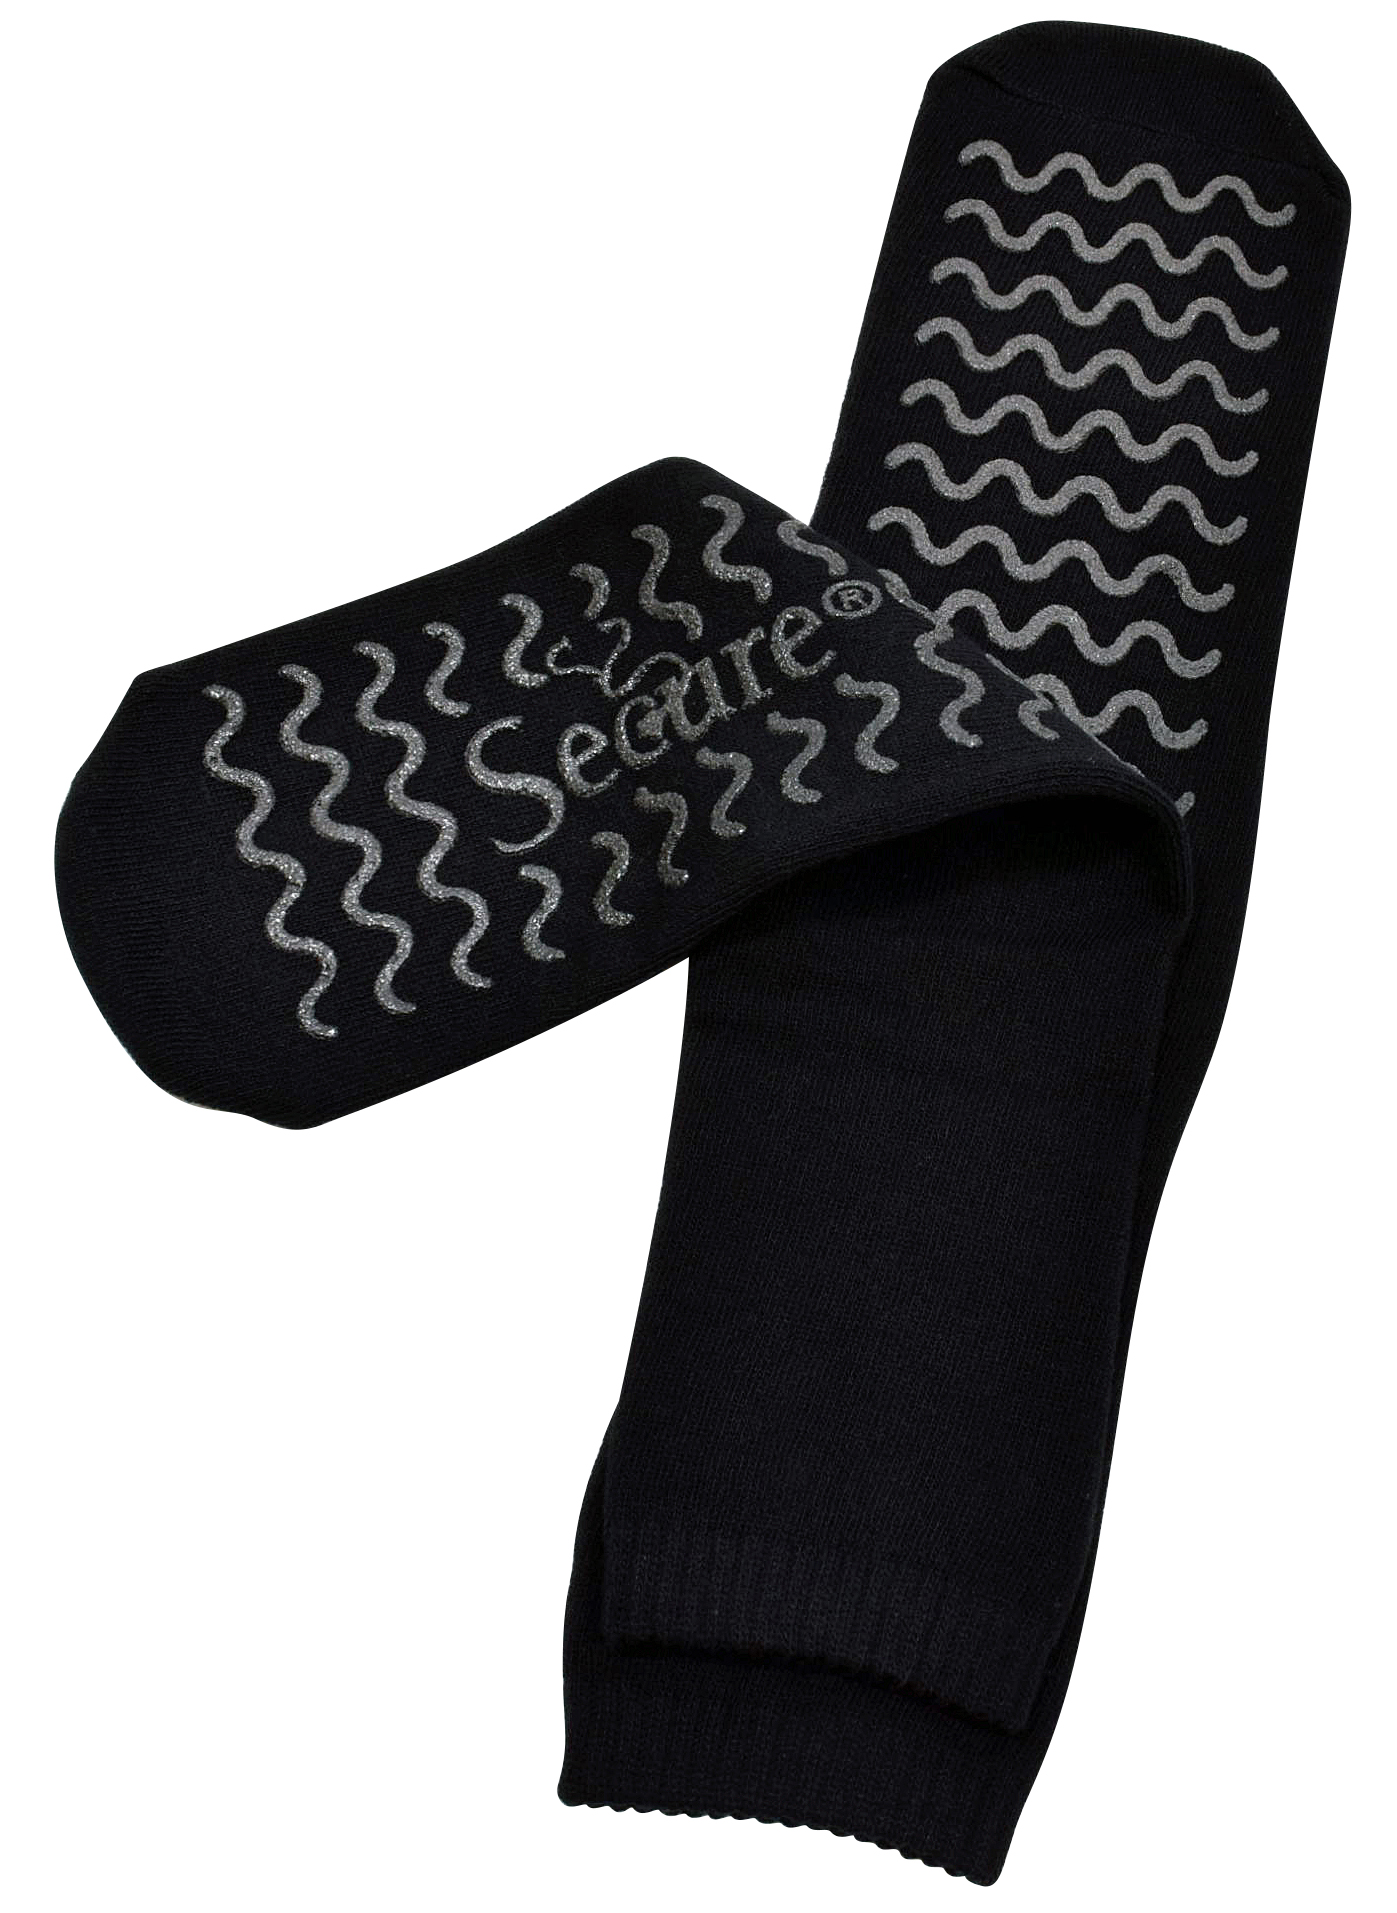 Non-slip Double Tread Fall Management Socks Small Red « Medical Mart